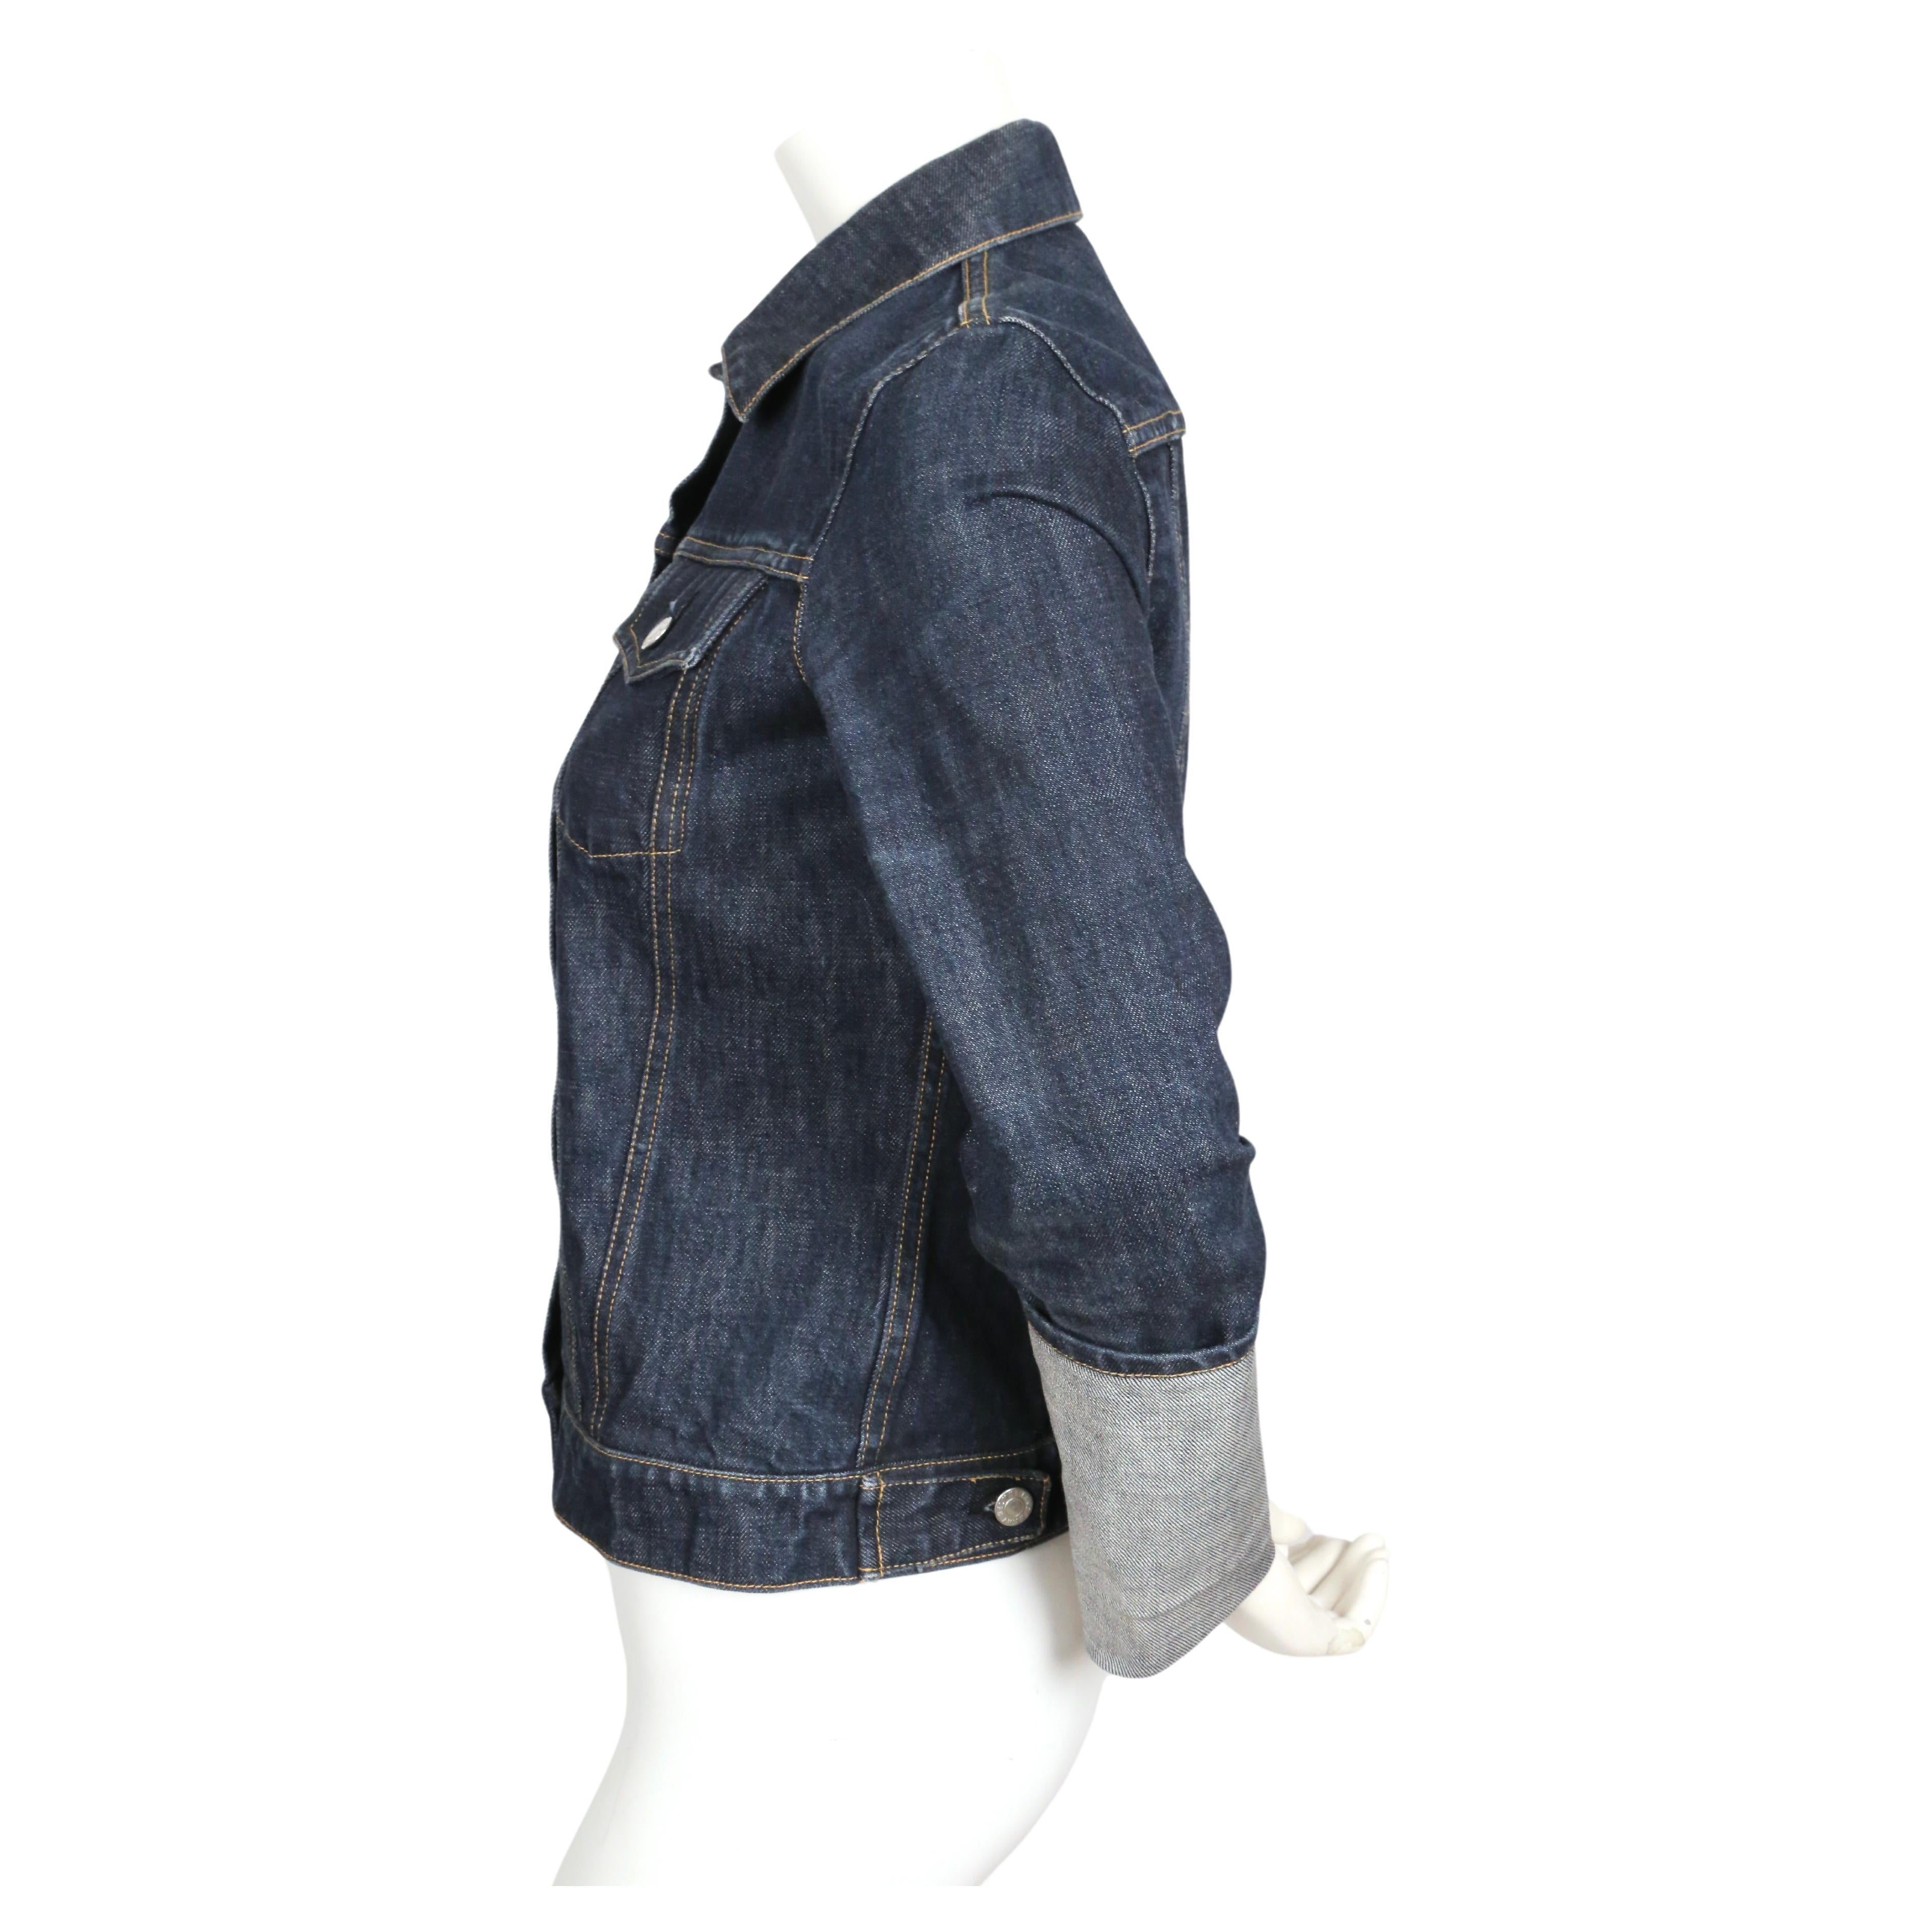 Women's or Men's 1990's HELMUT LANG classic denim jacket with extra long turn up cuffs